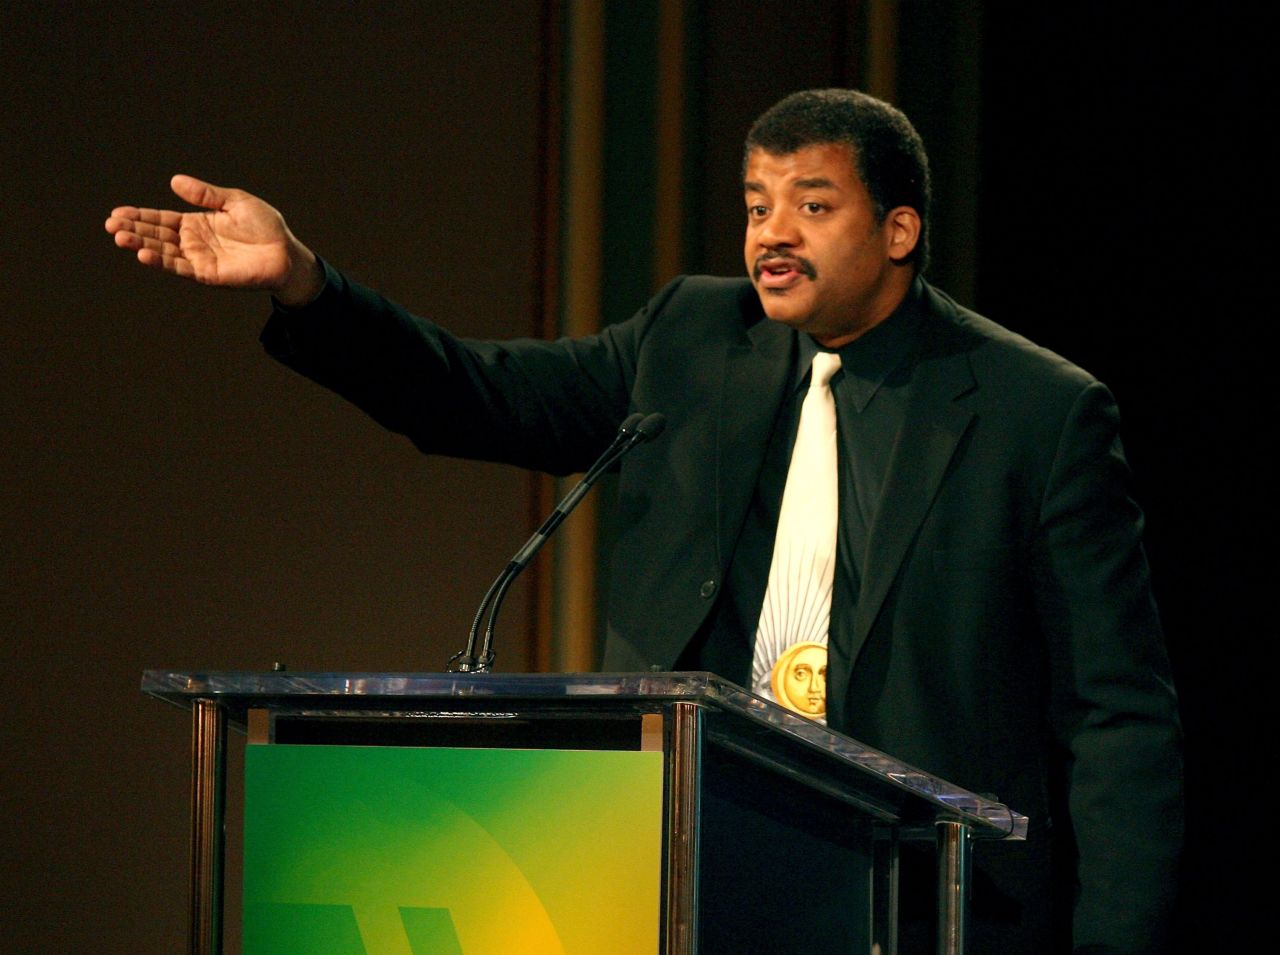 Neil deGrasse Tyson, the director of the Hayden Planetarium at the American Museum of Natural History, spoke at Rice University in Houston on May 11. Here, he spoke about his NovaScienceNow show, "Asteroid," in 2006. 